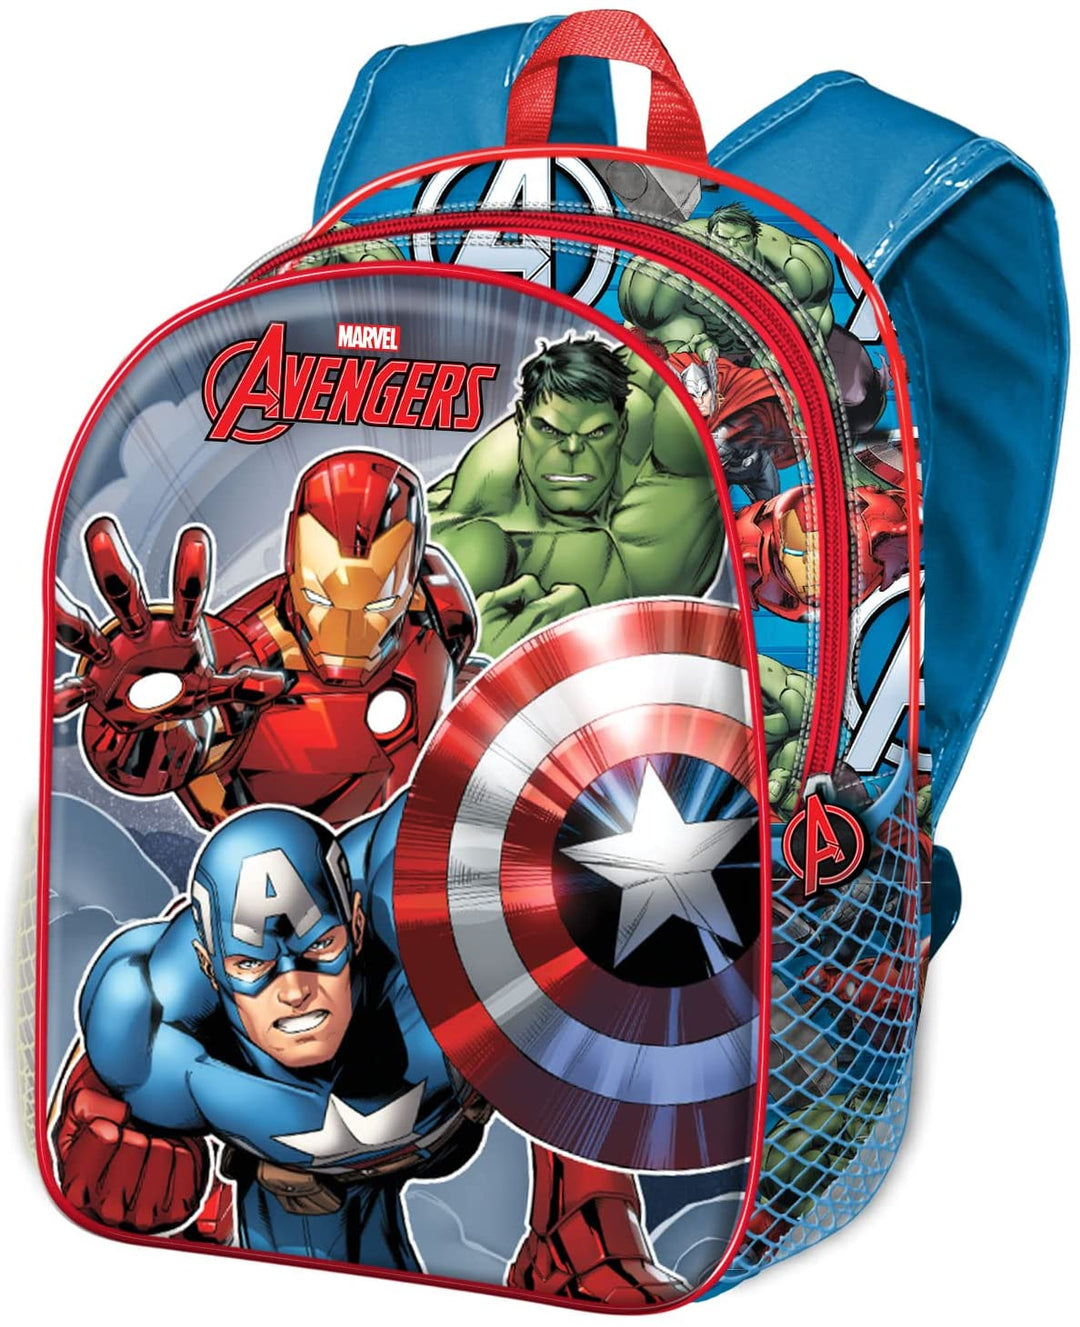 The Avengers Defy-Small 3D Backpack, Blue